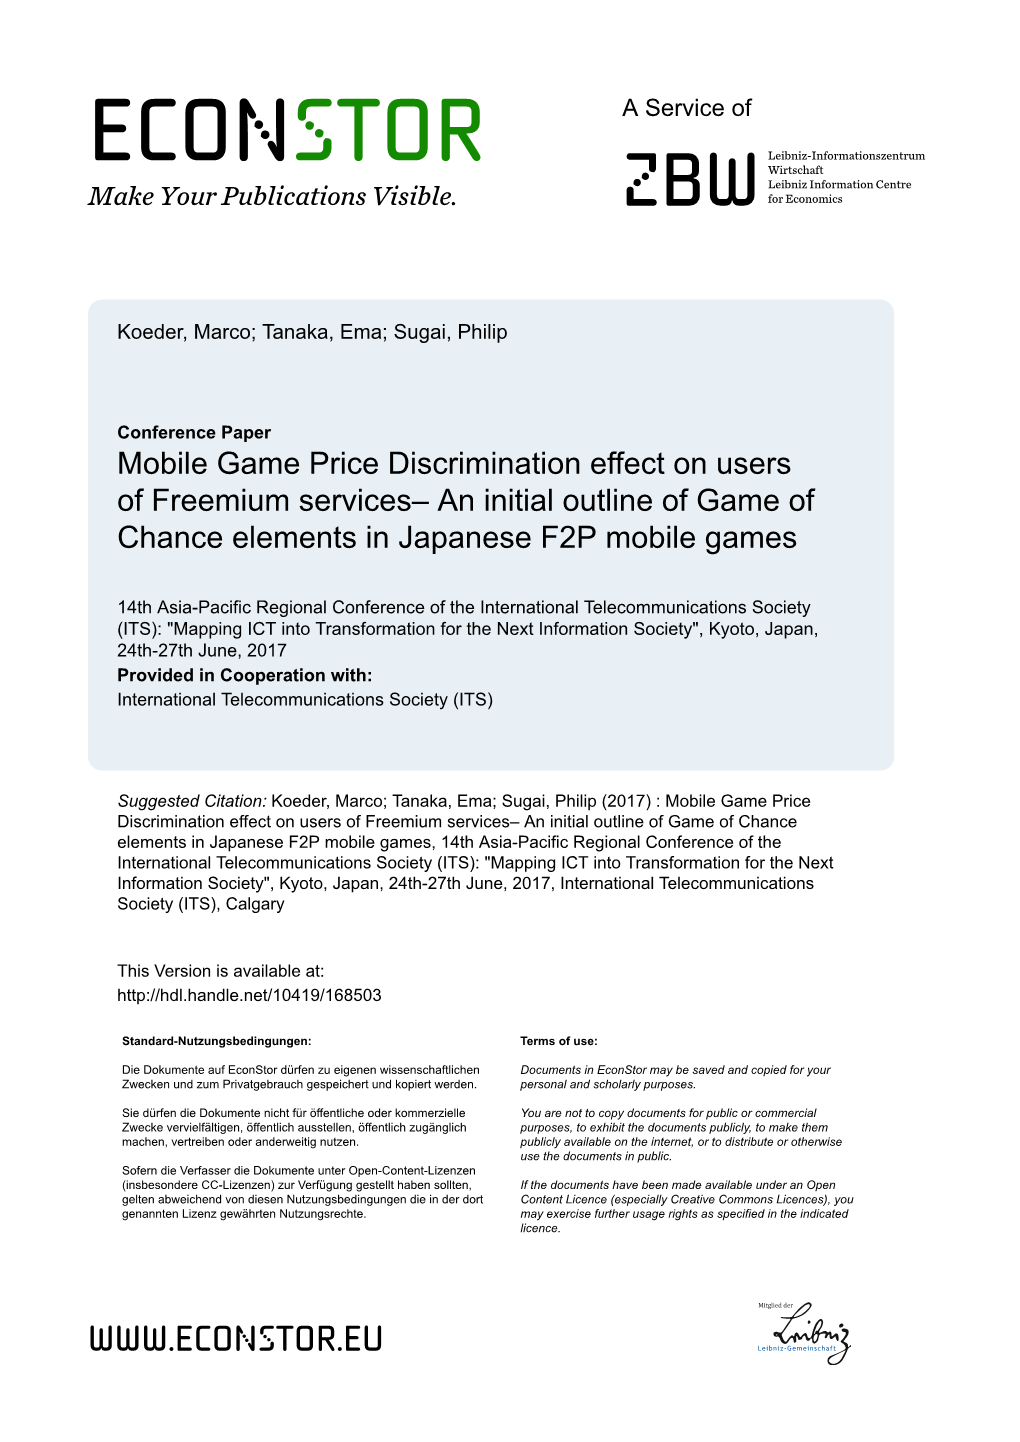 An Initial Outline of Game of Chance Elements in Japanese F2P Mobile Games